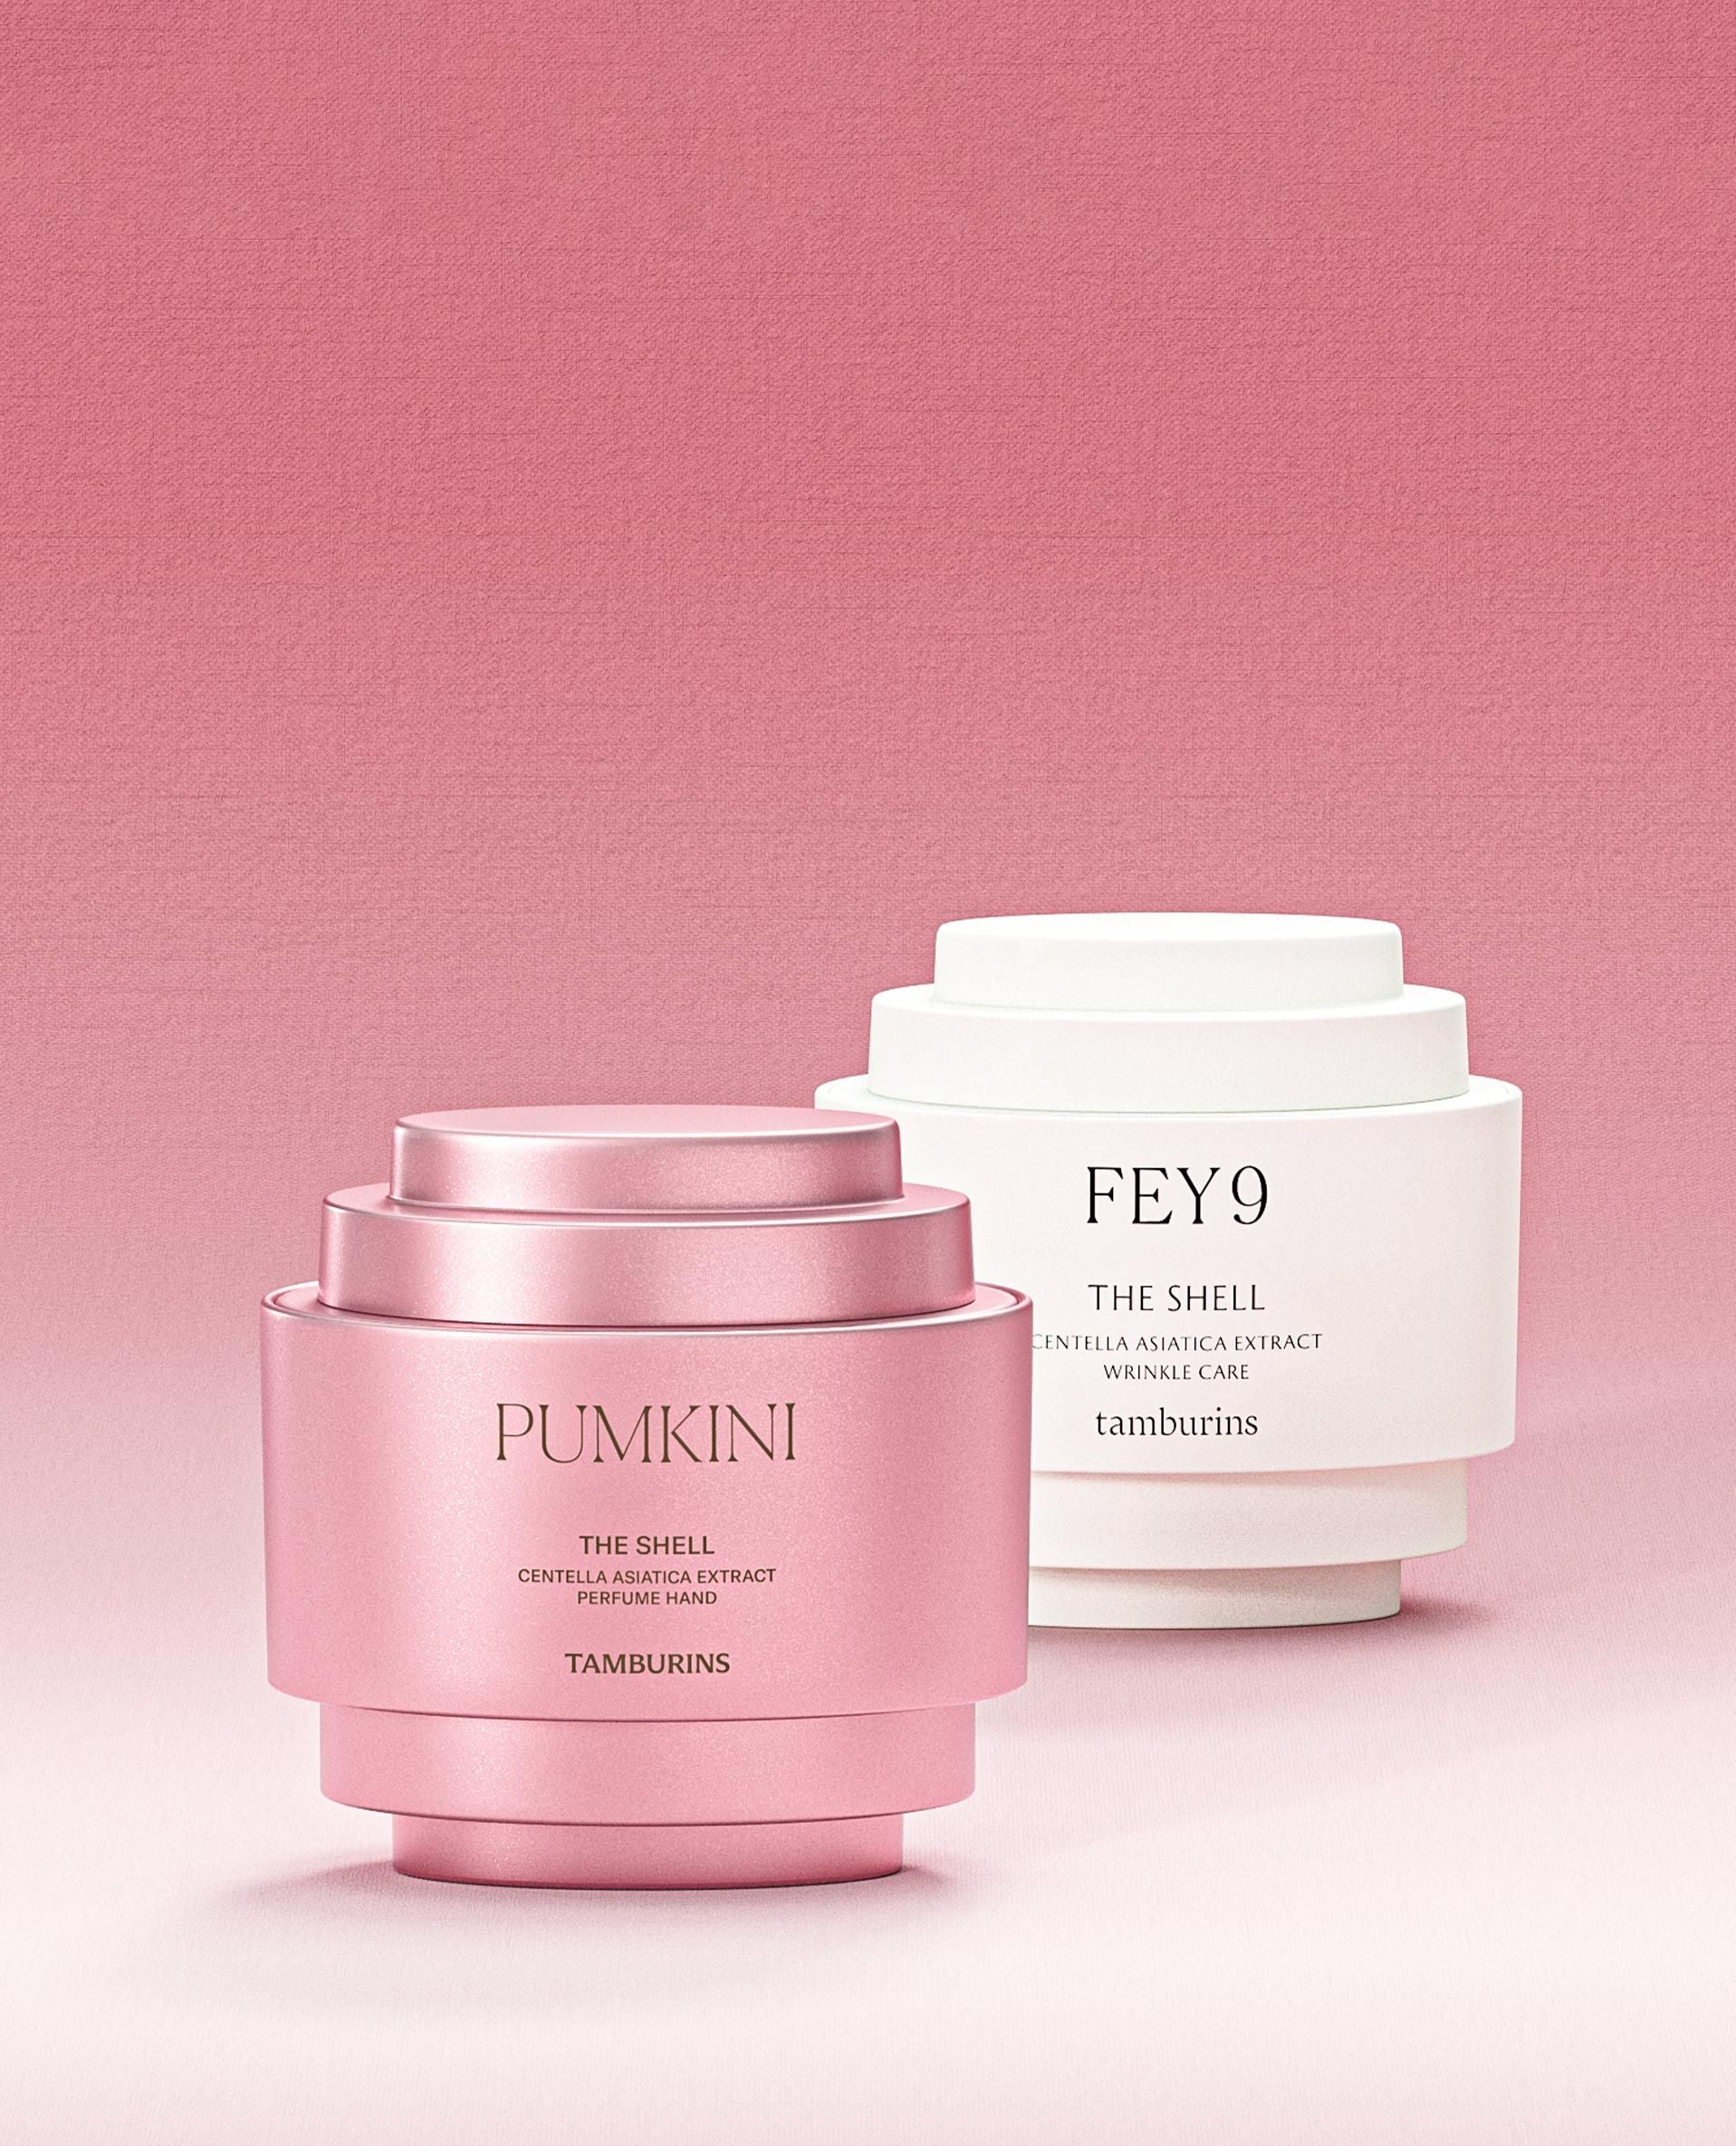 a pink and white container and a white container on a pink background